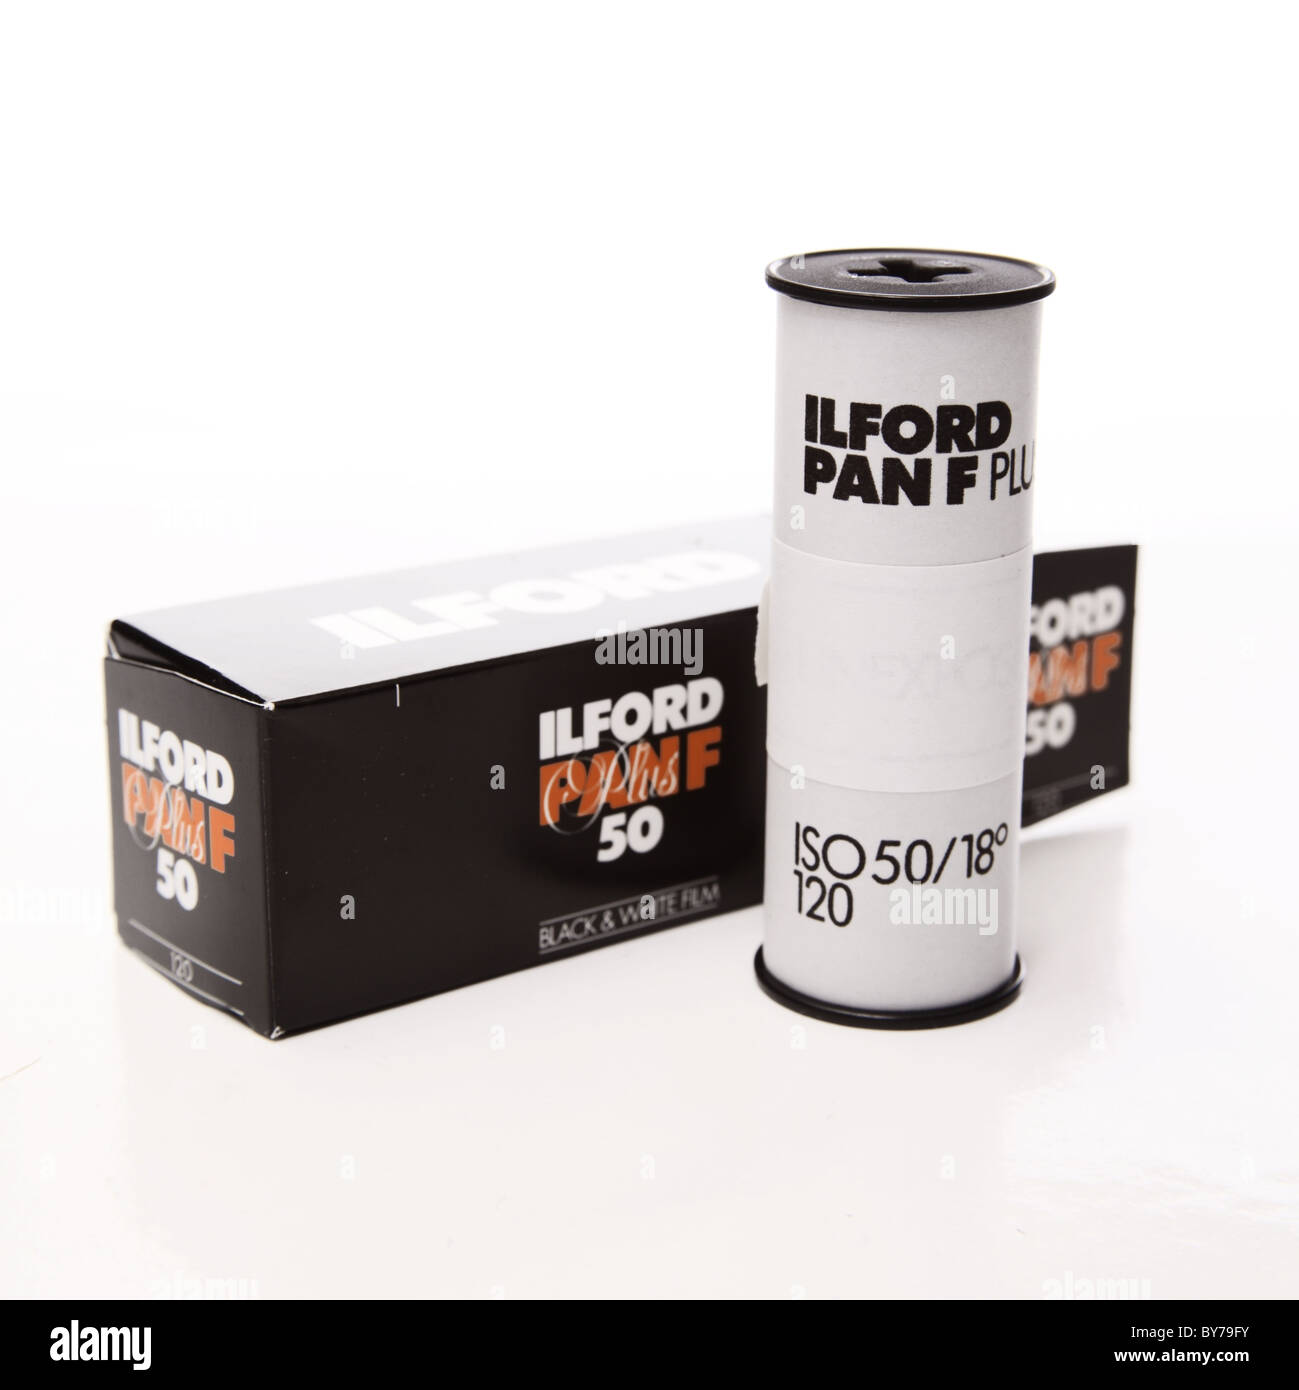 Ilford Pan F Roll film on a white background Stock Photo